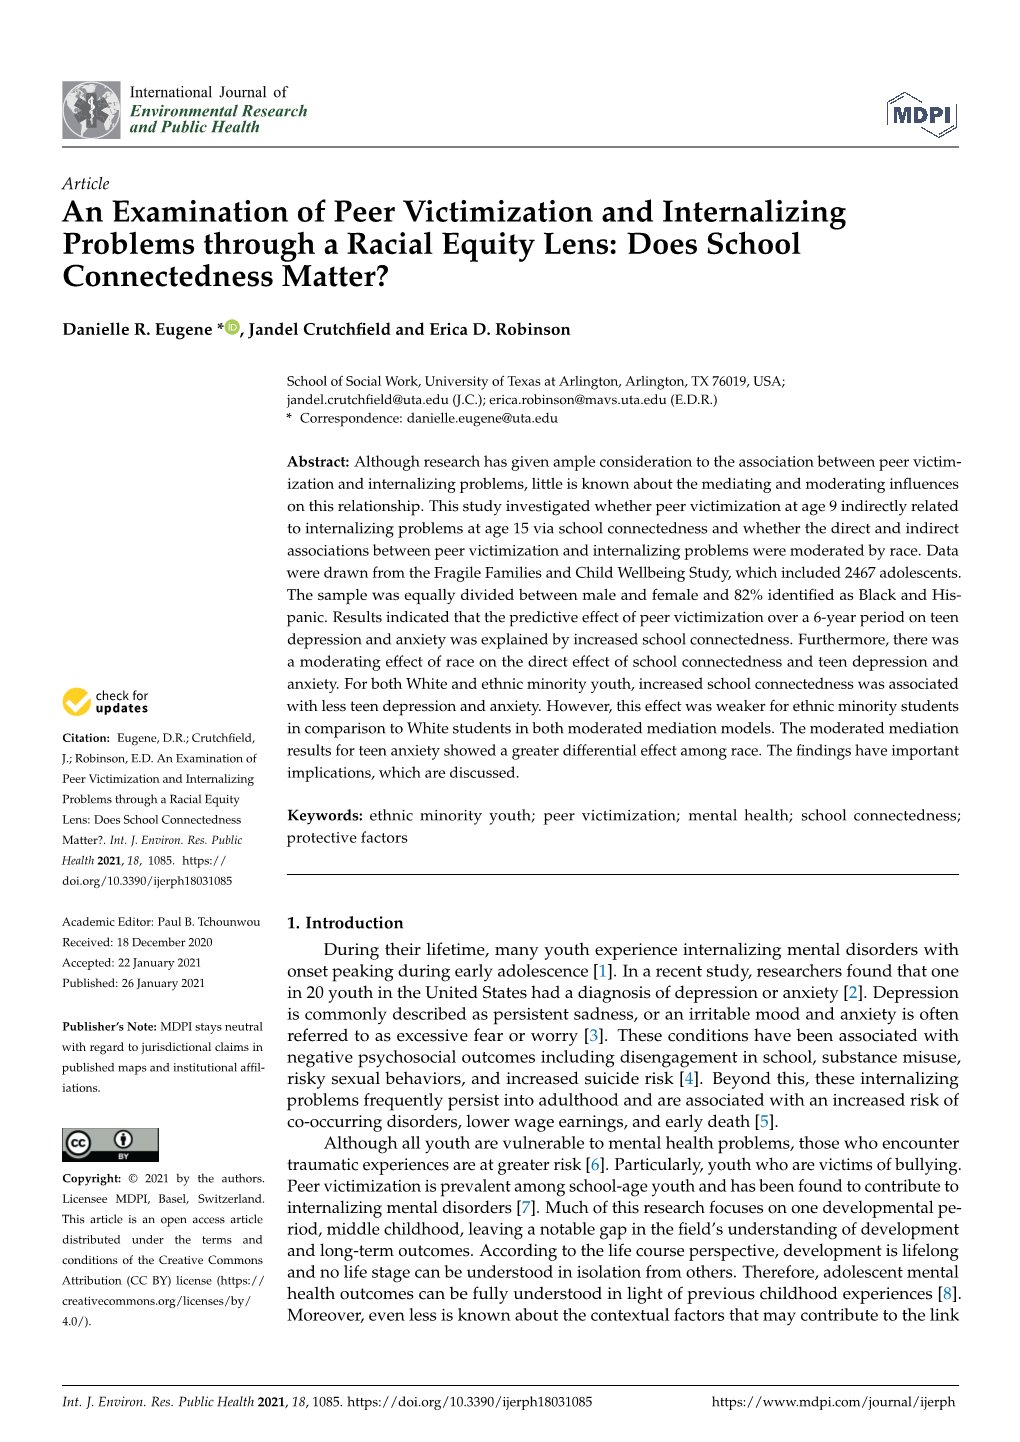 An Examination of Peer Victimization and Internalizing Problems Through a Racial Equity Lens: Does School Connectedness Matter?